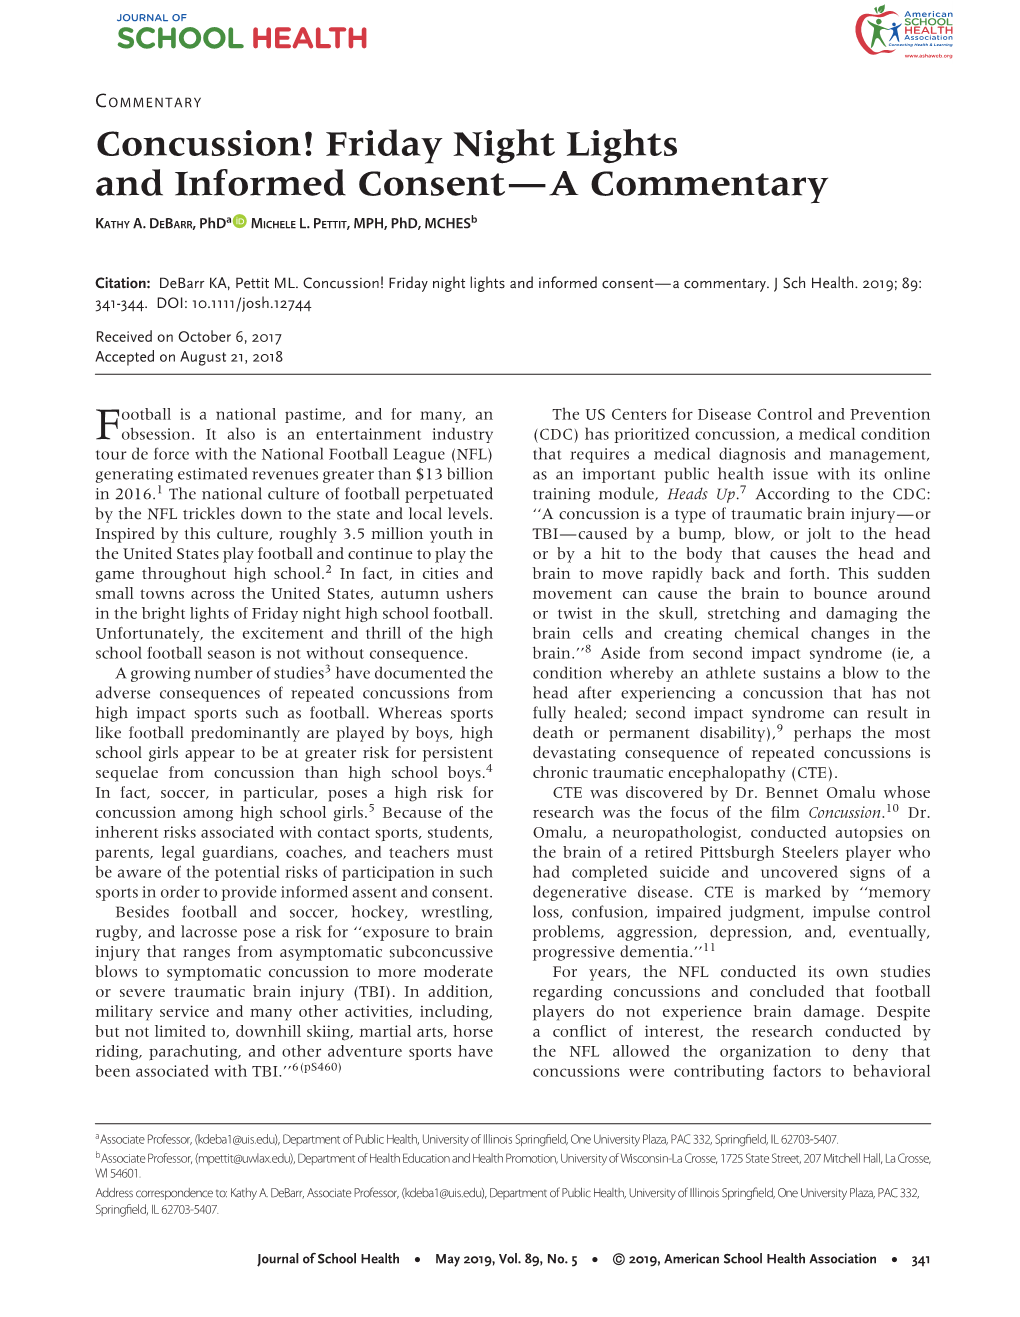 Concussion! Friday Night Lights and Informed Consent—A Commentary